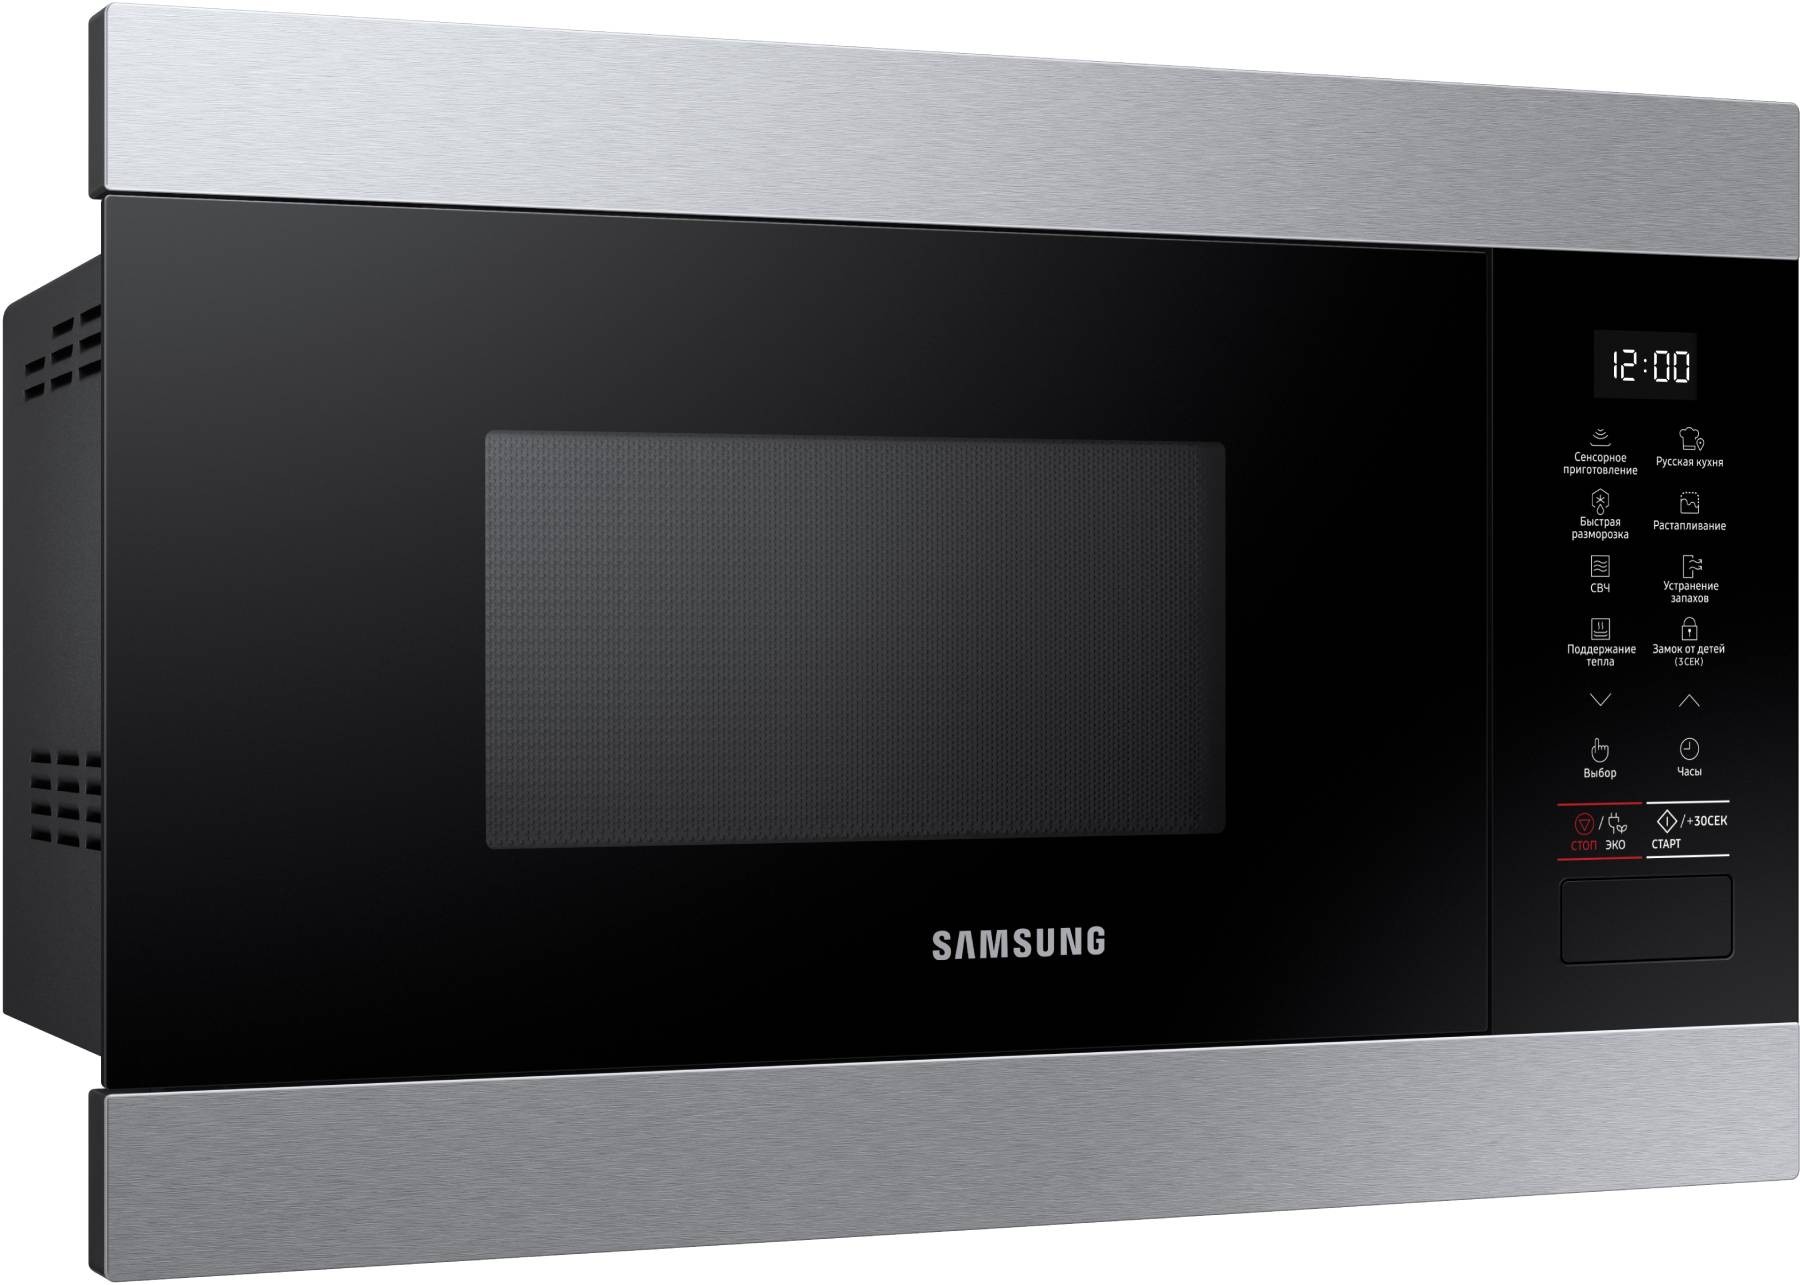 SAMSUNG Micro ondes Encastrable Auto Cook 1250W 22L Inox - MS22M8274AT